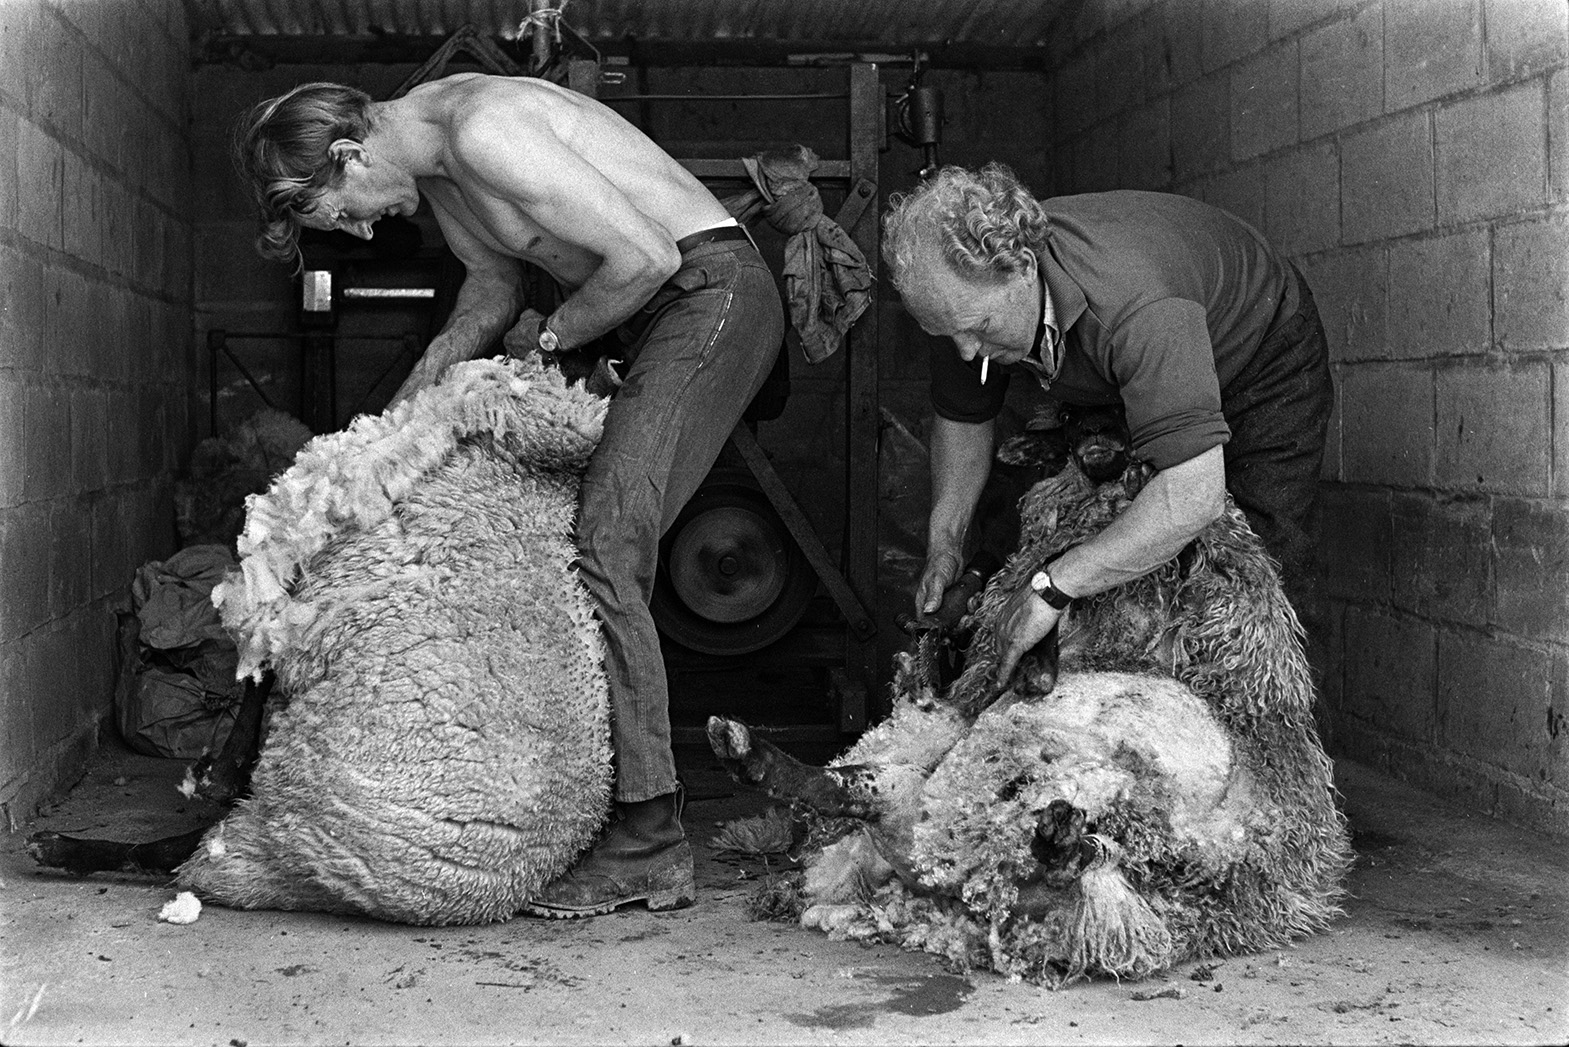 Ivor Bourne and another man shearing sheep, using a shearing machine, in a barn at Mill Road Farm, Beaford. The farm was also known as Jeffrys.